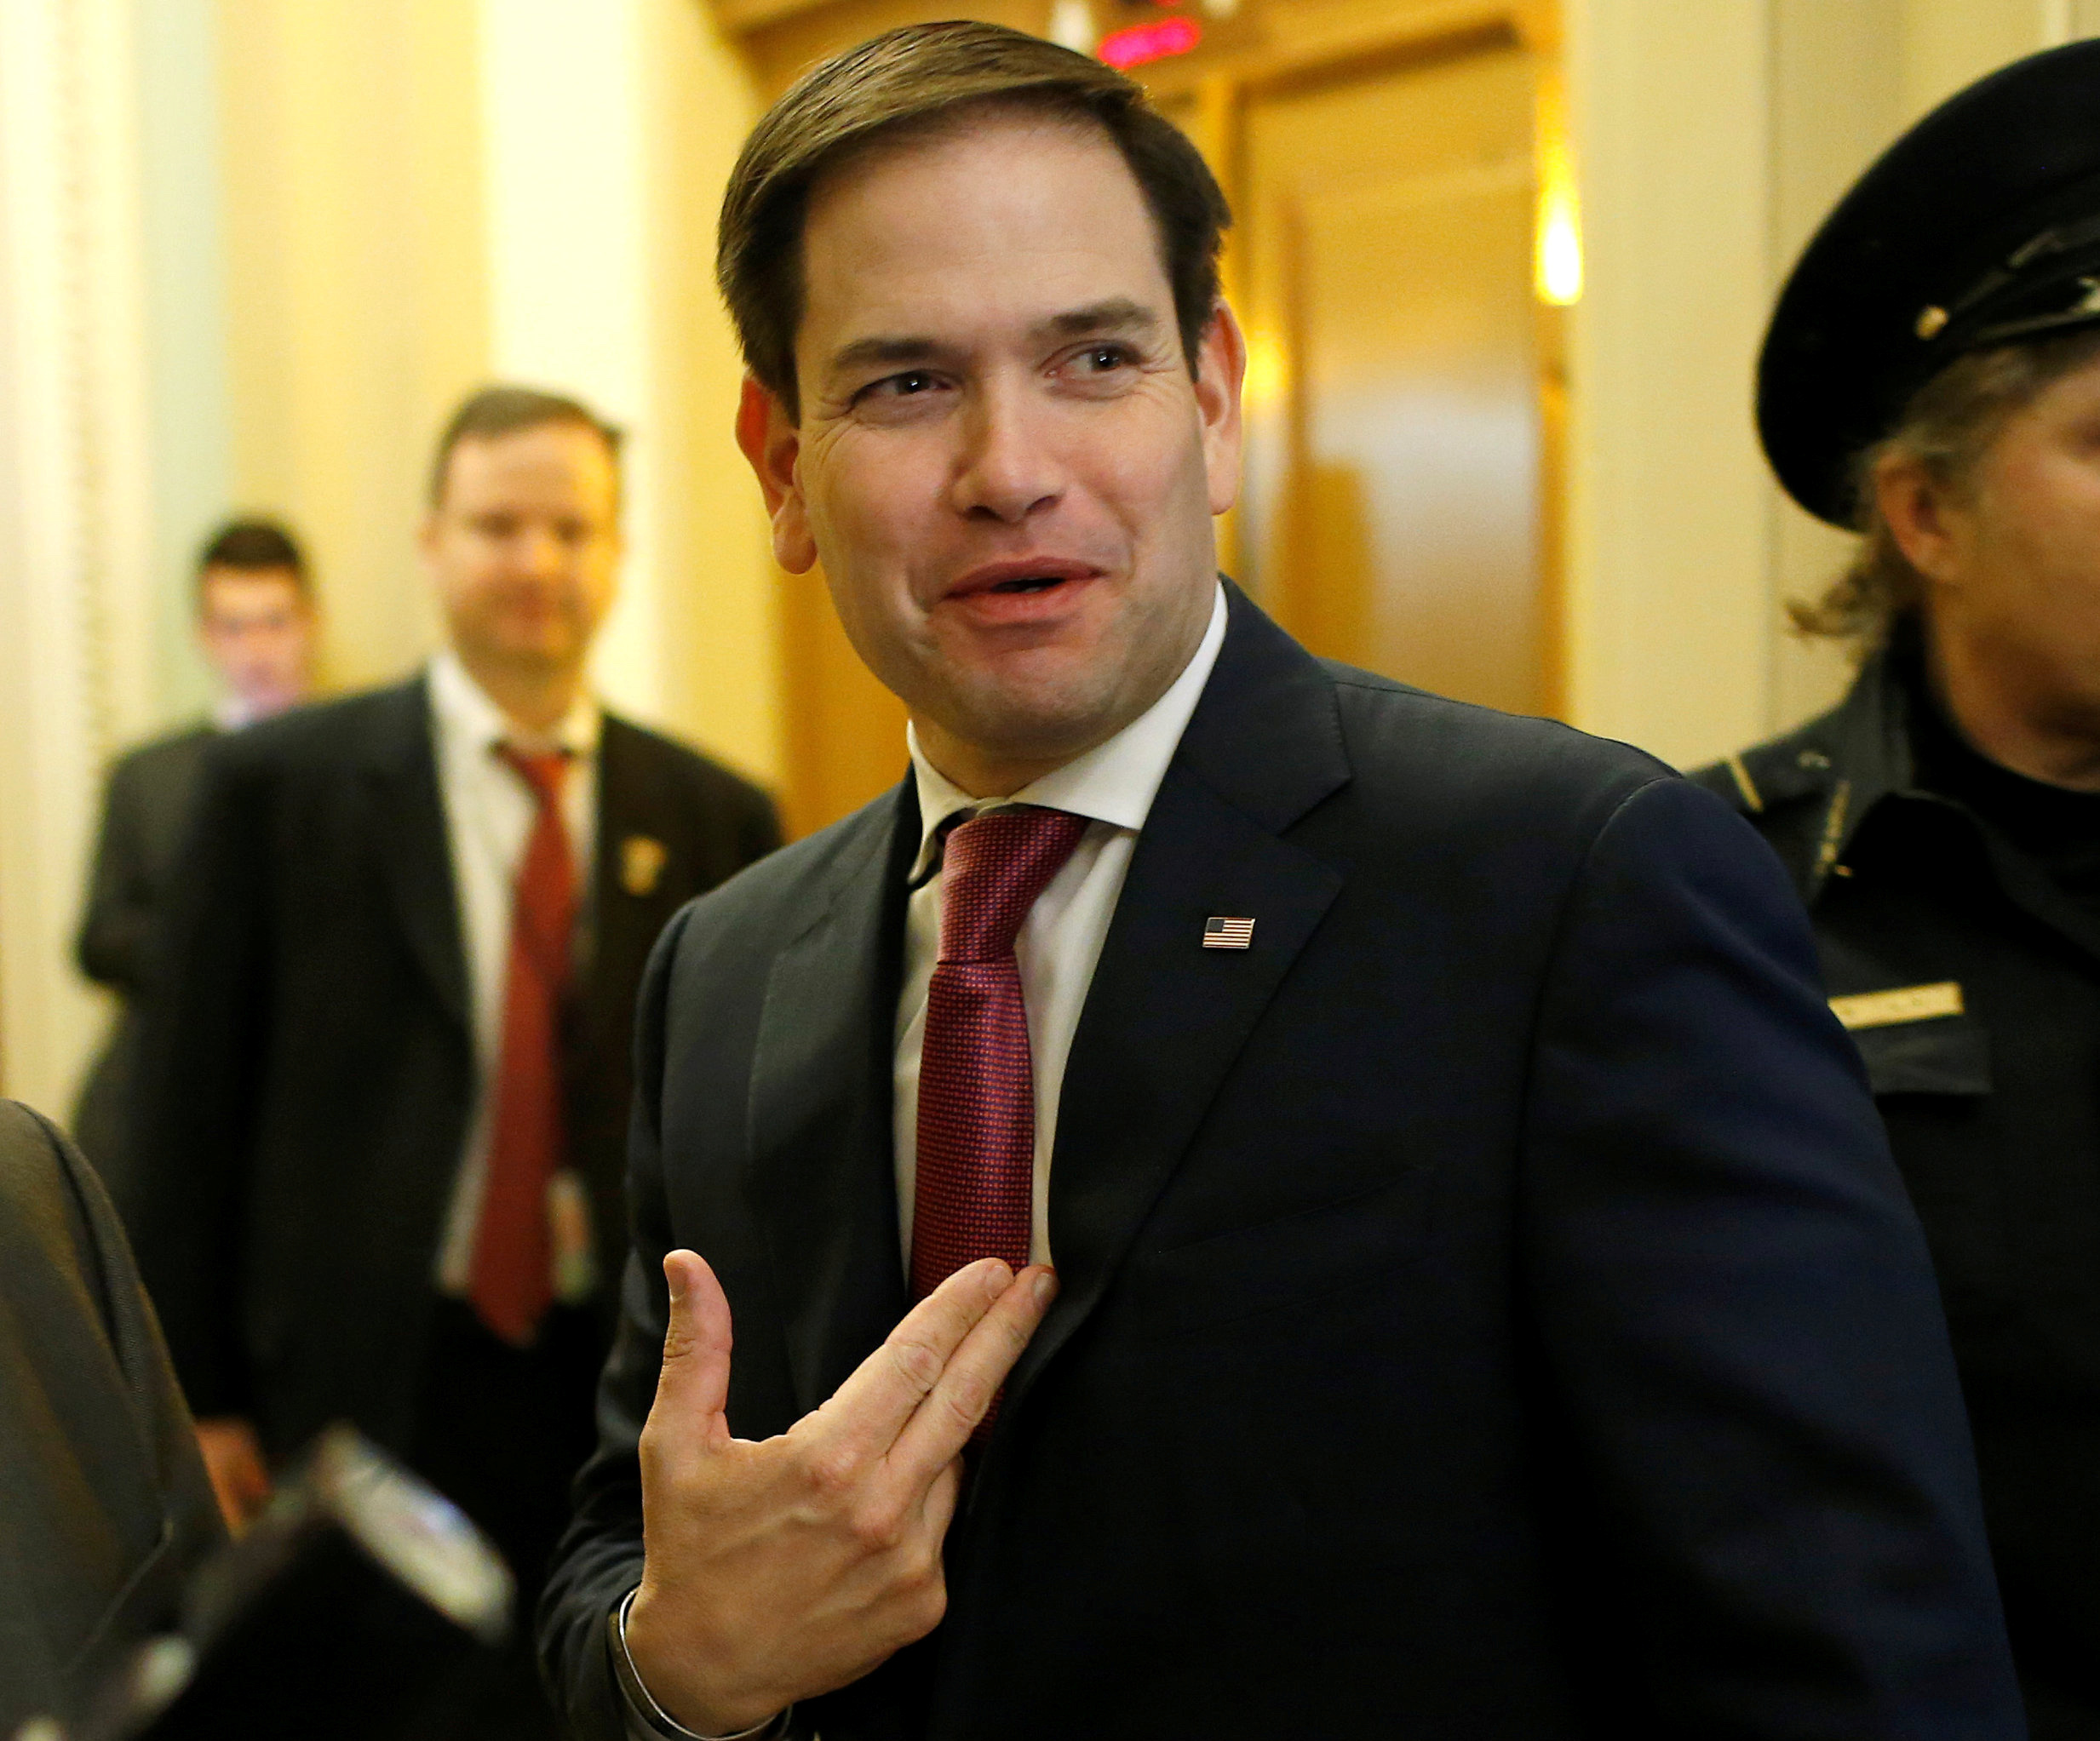 Rubio: Notes from Trump Russia meeting should go to committees